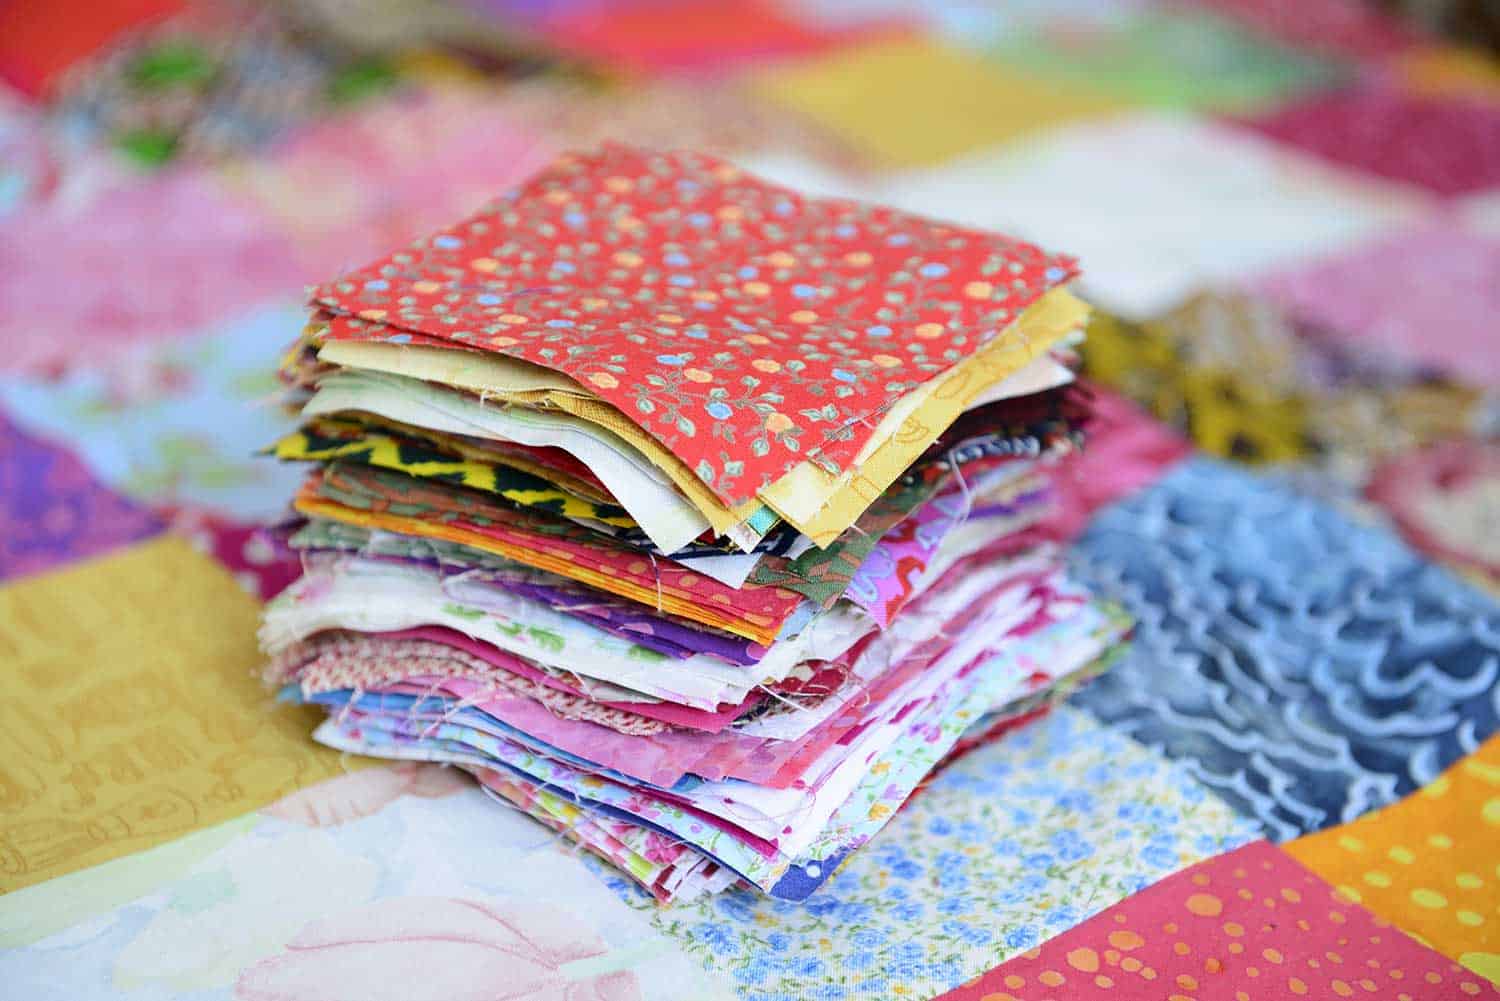 Pile of different colour and patterned material patches for a patchwork quilt